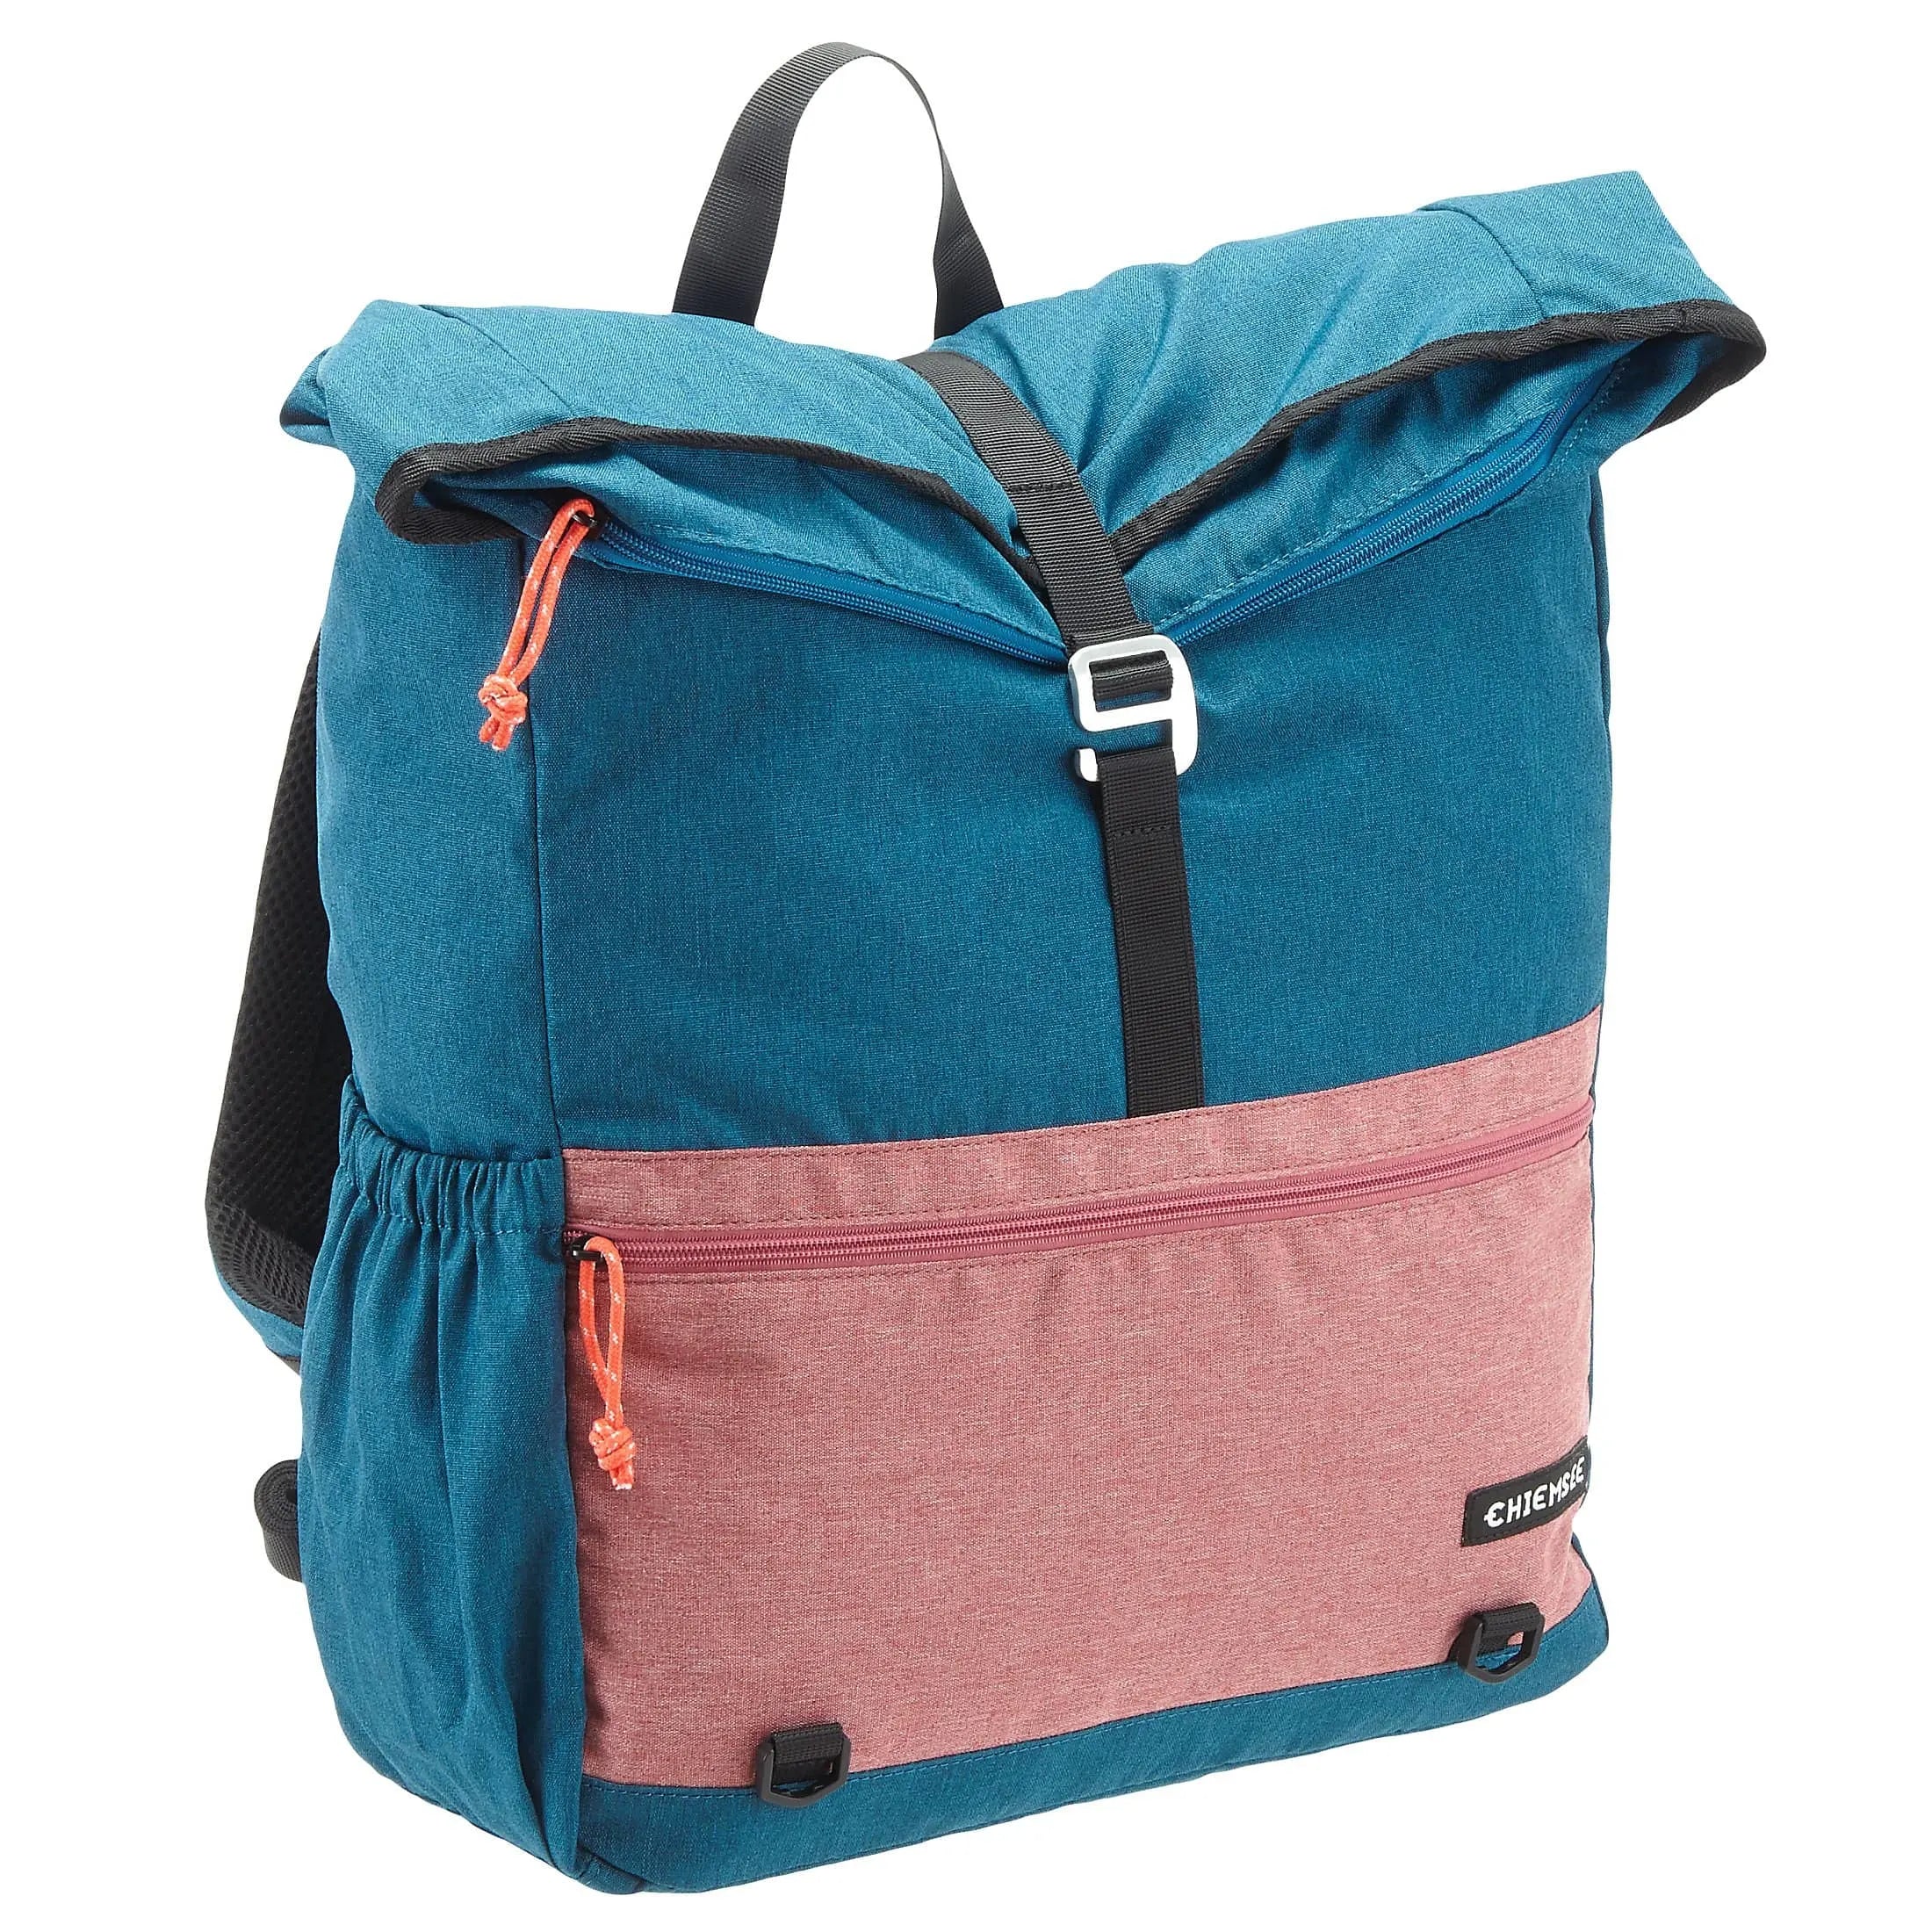 Chiemsee Sports & Travel Bags Casual Backpack 40 cm - coronet blue